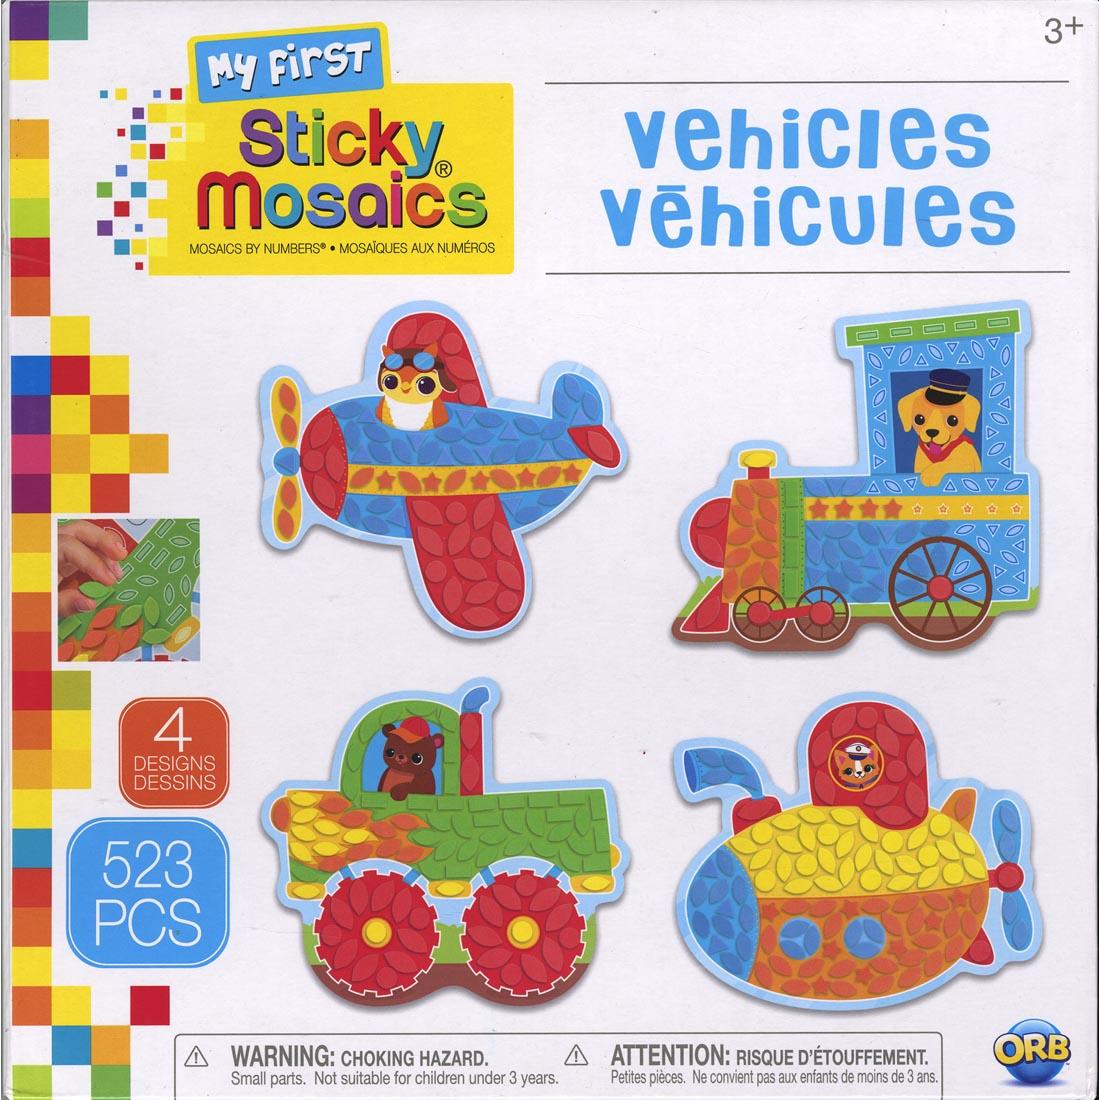 box of adhesive-backed foam mosaic crafts, featuring 4 different vehicle designs